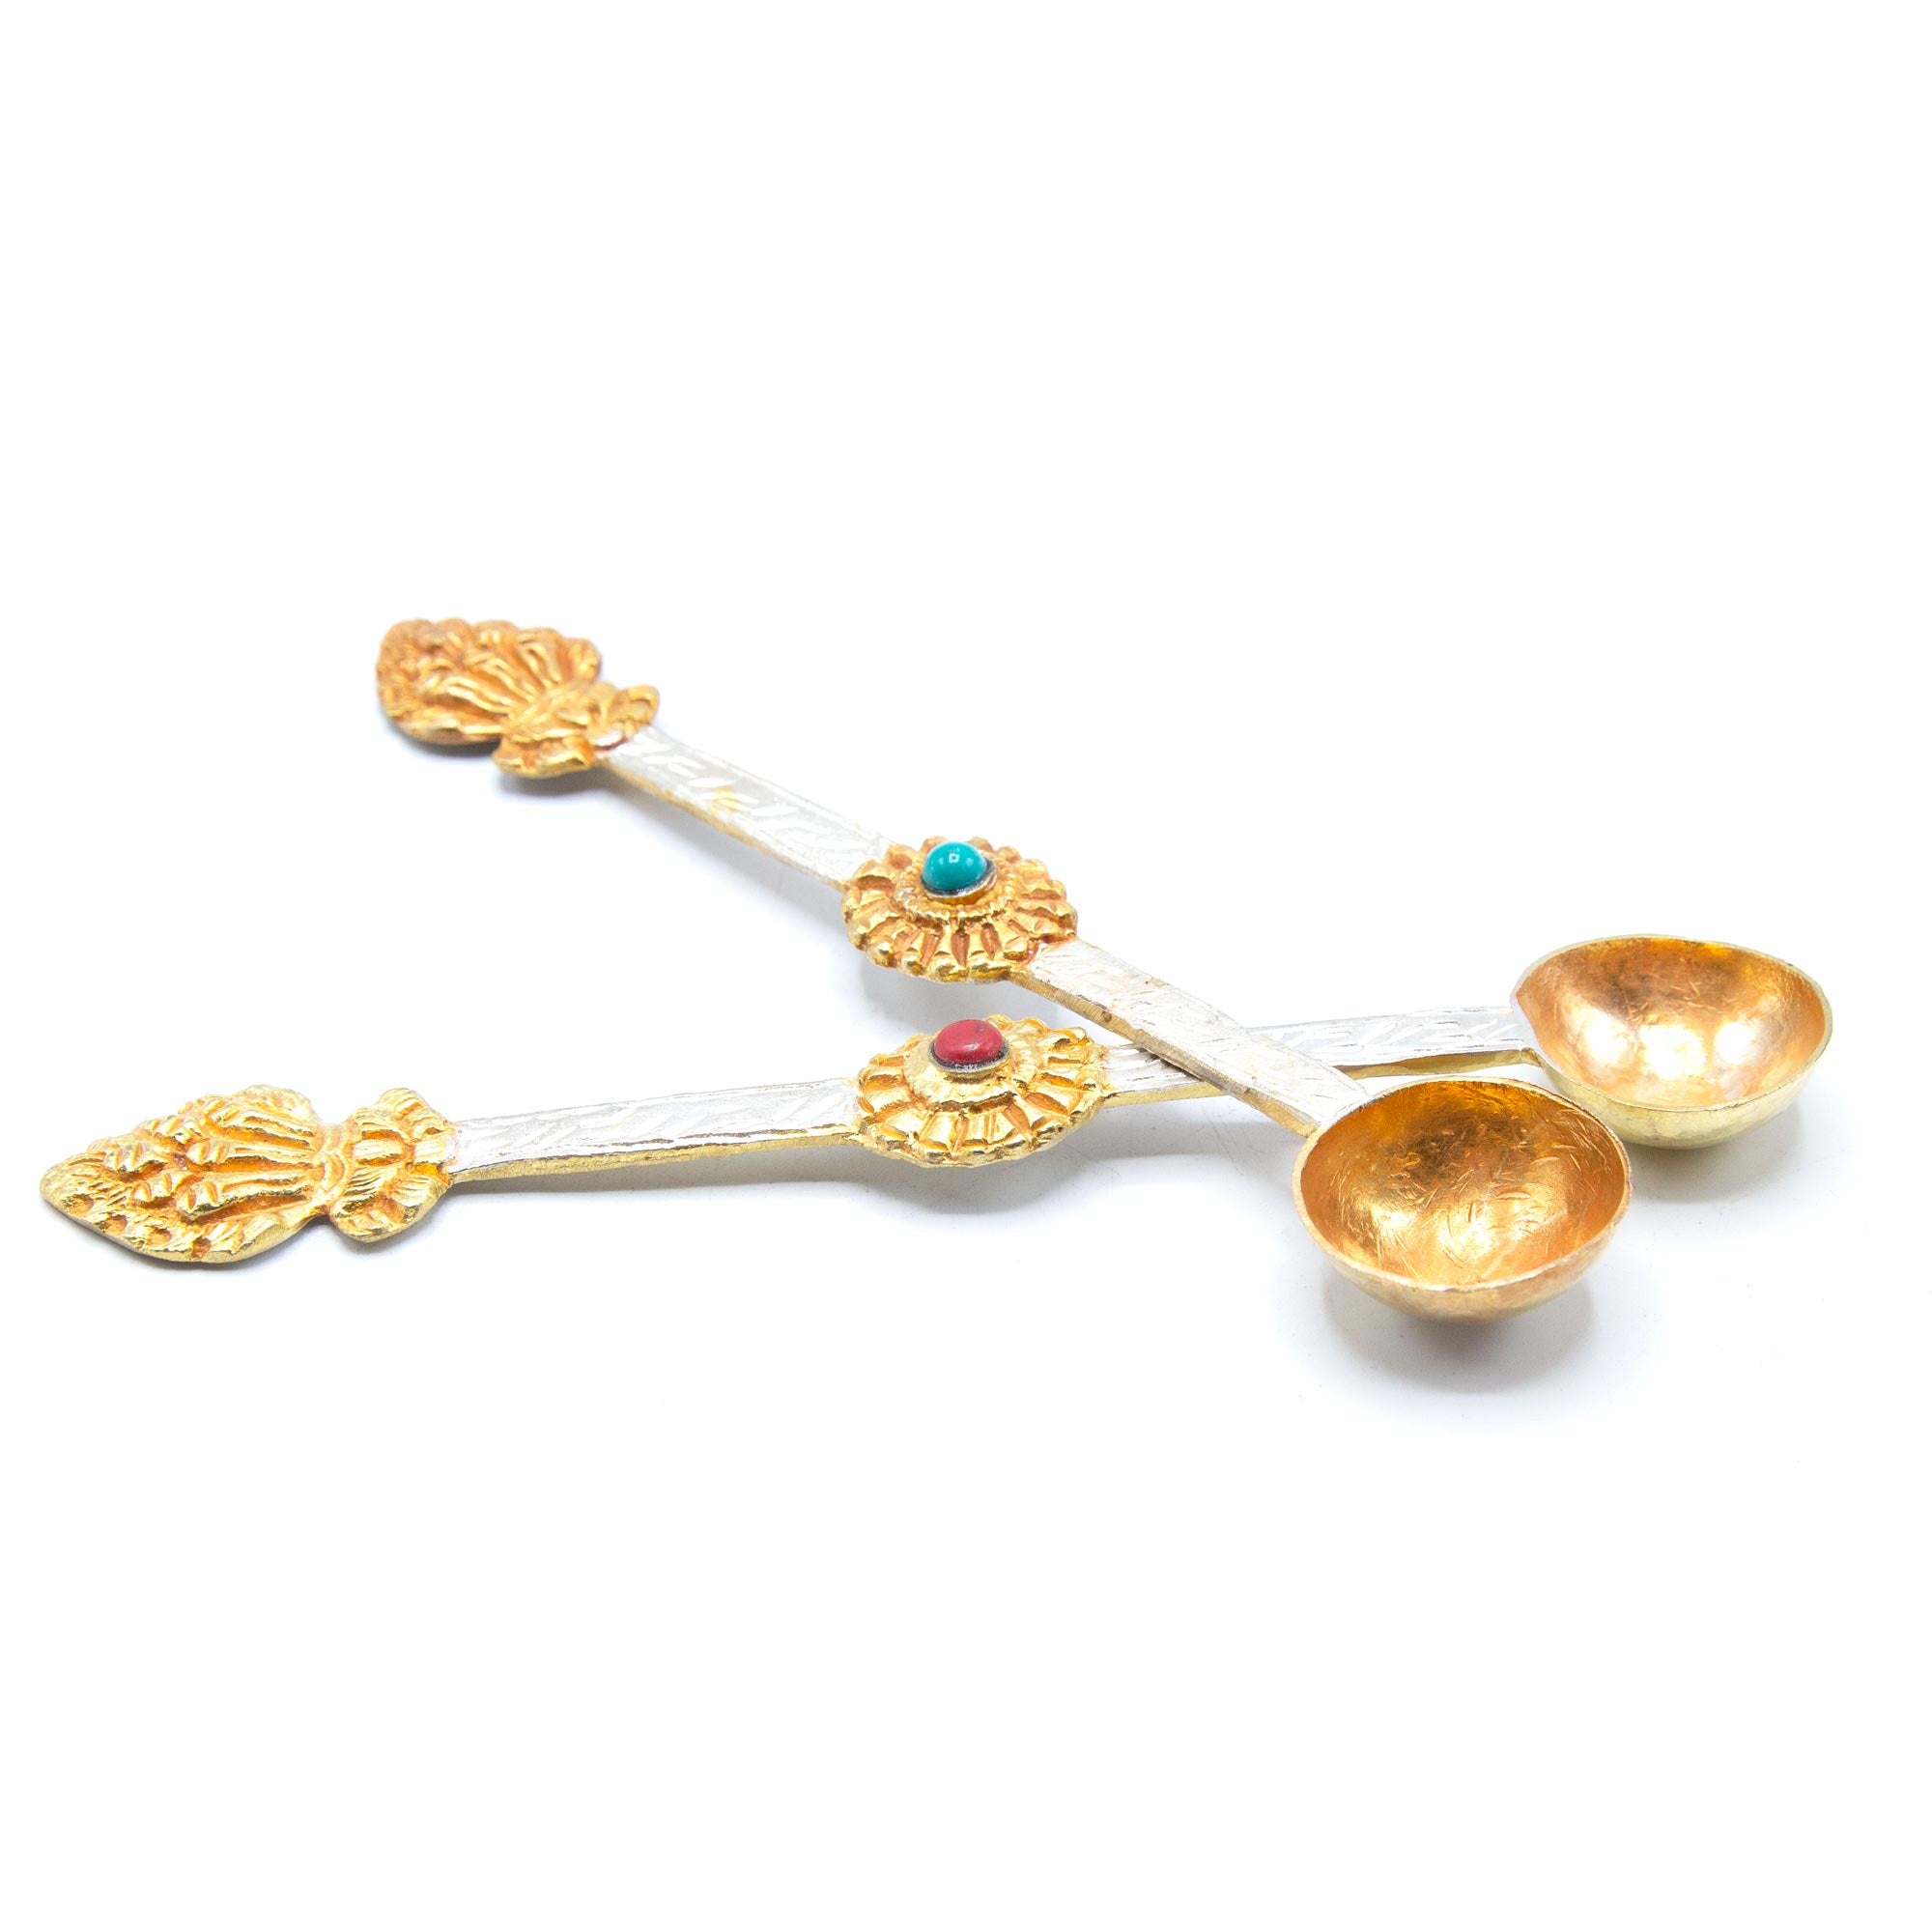 Silver and Gold Brushed Ritual Spoon 4